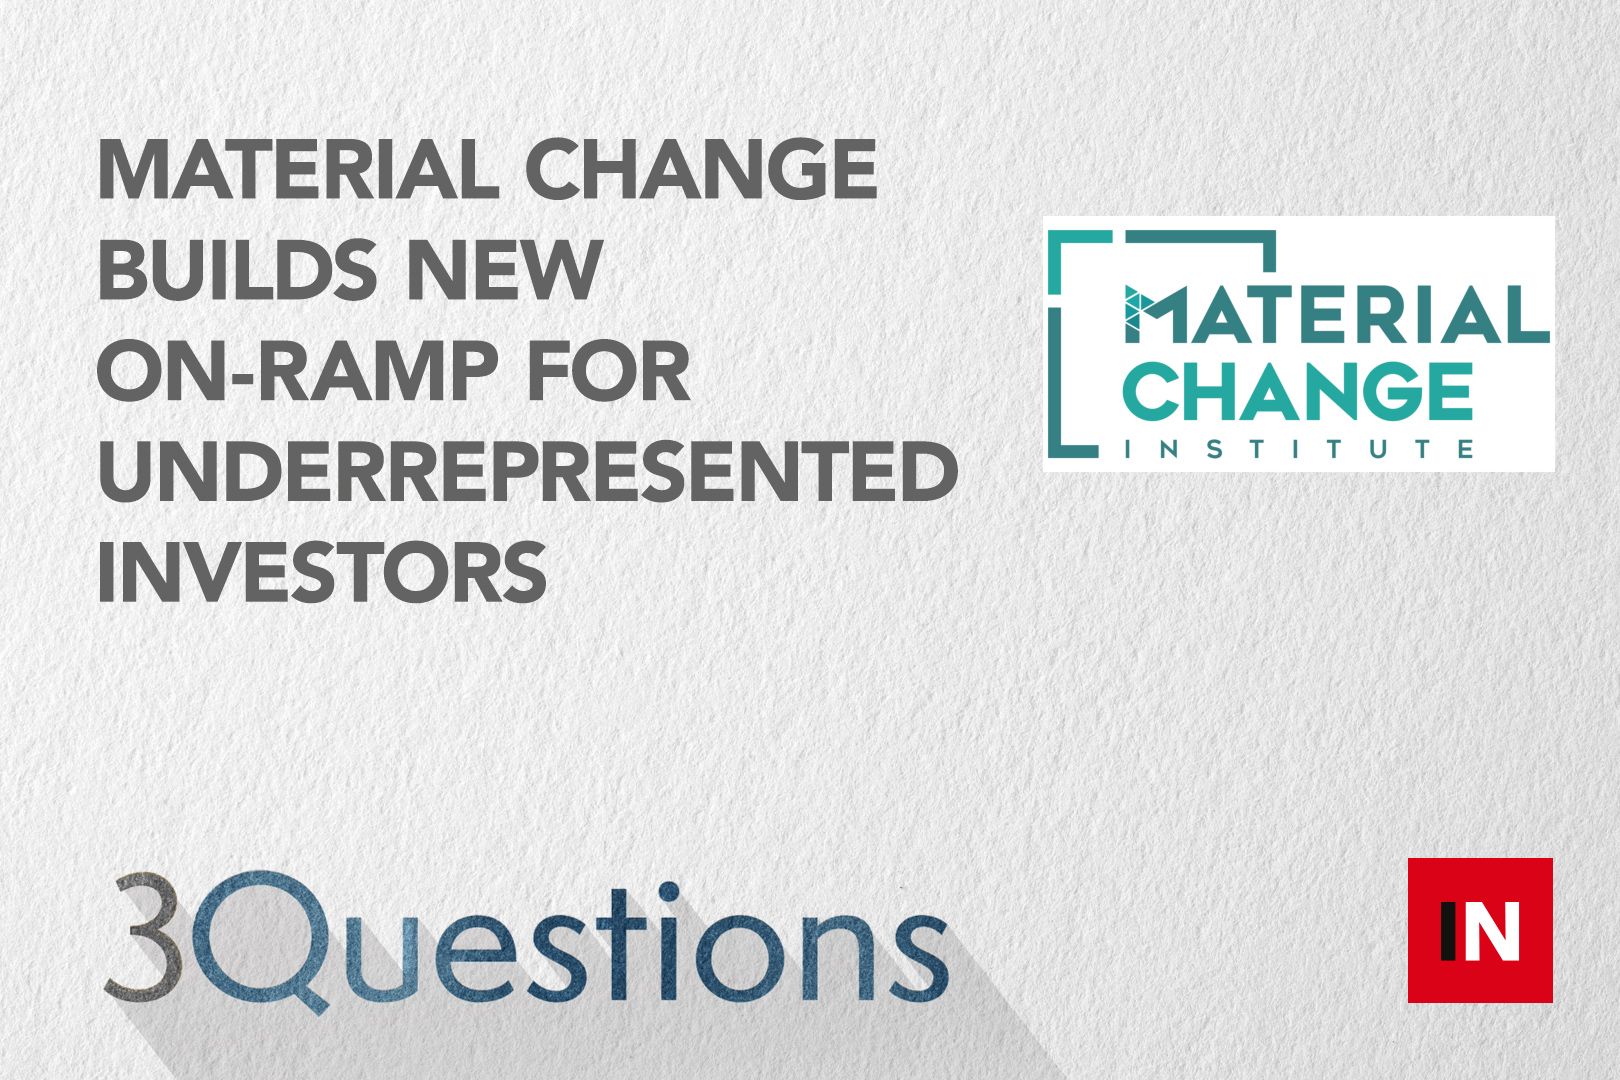 Material Change builds new on-ramp for underrepresented investors